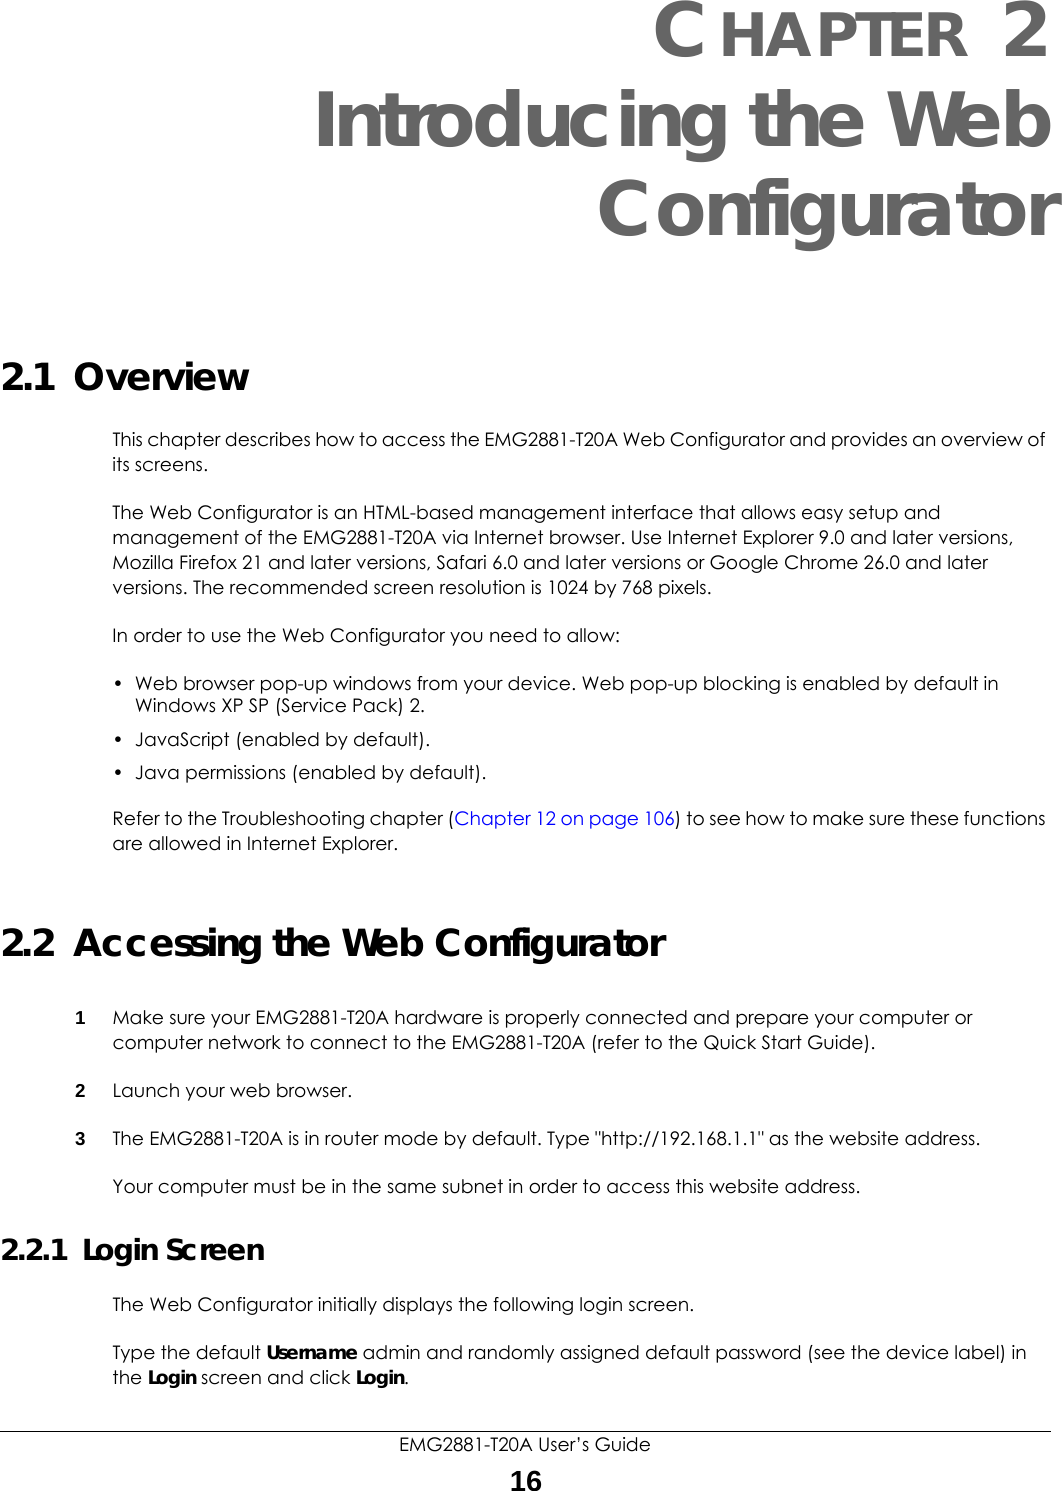 EMG2881-T20A User’s Guide16CHAPTER 2Introducing the WebConfigurator2.1  OverviewThis chapter describes how to access the EMG2881-T20A Web Configurator and provides an overview of its screens.The Web Configurator is an HTML-based management interface that allows easy setup and management of the EMG2881-T20A via Internet browser. Use Internet Explorer 9.0 and later versions, Mozilla Firefox 21 and later versions, Safari 6.0 and later versions or Google Chrome 26.0 and later versions. The recommended screen resolution is 1024 by 768 pixels.In order to use the Web Configurator you need to allow:• Web browser pop-up windows from your device. Web pop-up blocking is enabled by default in Windows XP SP (Service Pack) 2.• JavaScript (enabled by default).• Java permissions (enabled by default).Refer to the Troubleshooting chapter (Chapter 12 on page 106) to see how to make sure these functions are allowed in Internet Explorer.2.2  Accessing the Web Configurator1Make sure your EMG2881-T20A hardware is properly connected and prepare your computer or computer network to connect to the EMG2881-T20A (refer to the Quick Start Guide).2Launch your web browser.3The EMG2881-T20A is in router mode by default. Type &quot;http://192.168.1.1&quot; as the website address.Your computer must be in the same subnet in order to access this website address.2.2.1  Login ScreenThe Web Configurator initially displays the following login screen.Type the default Username admin and randomly assigned default password (see the device label) in the Login screen and click Login.